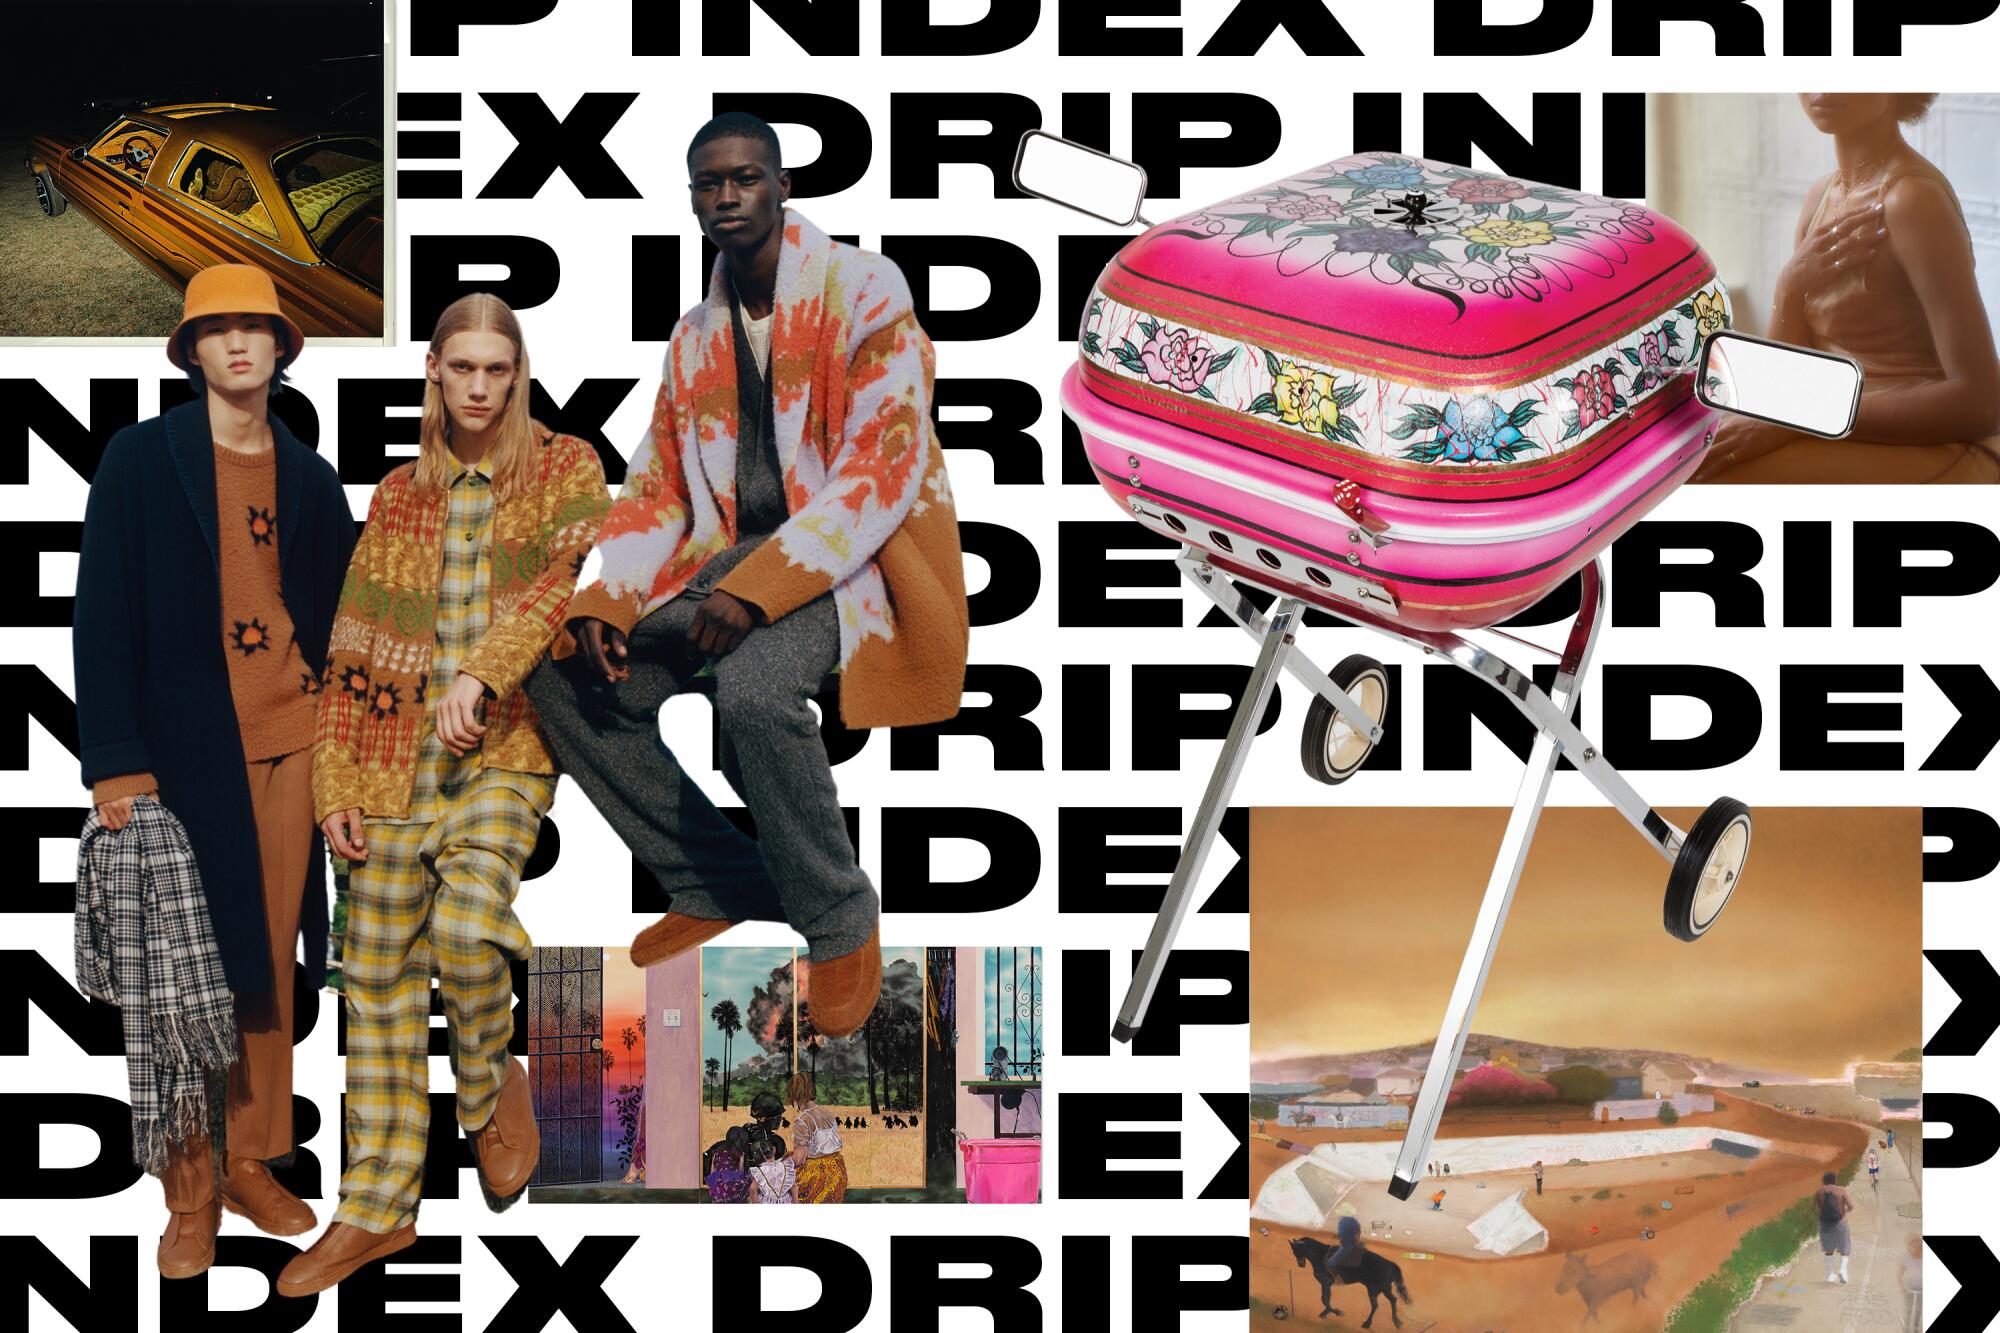 Collage featuring different art and fashion photos over a pattern of the words “Drip Index”